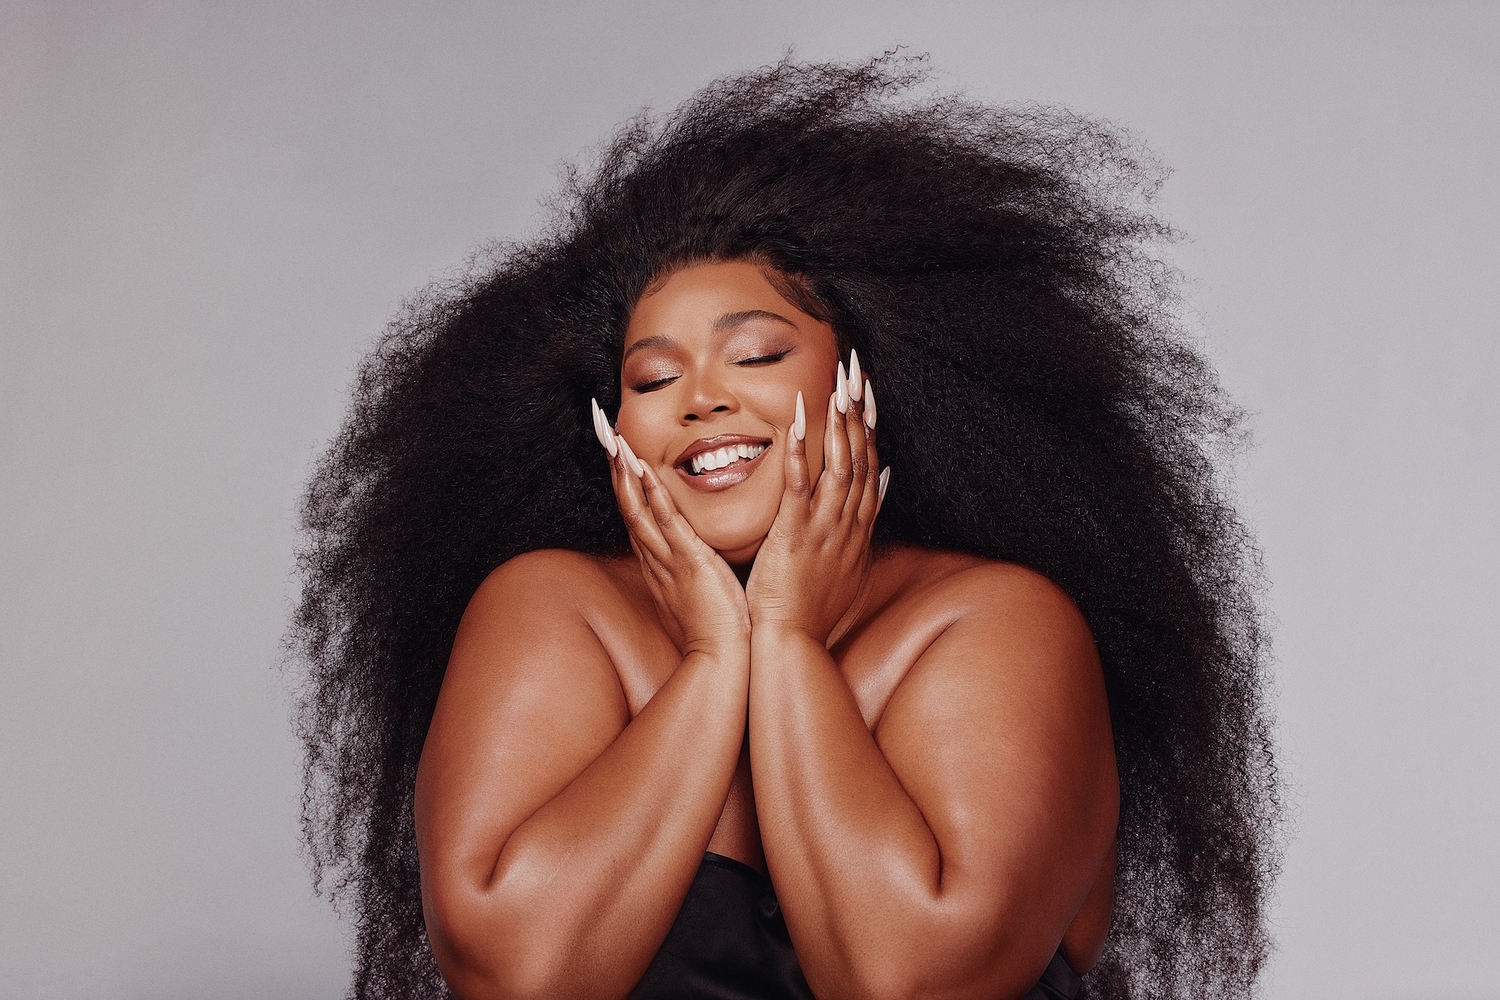 Lizzo shares ‘Special’ remix with SZA